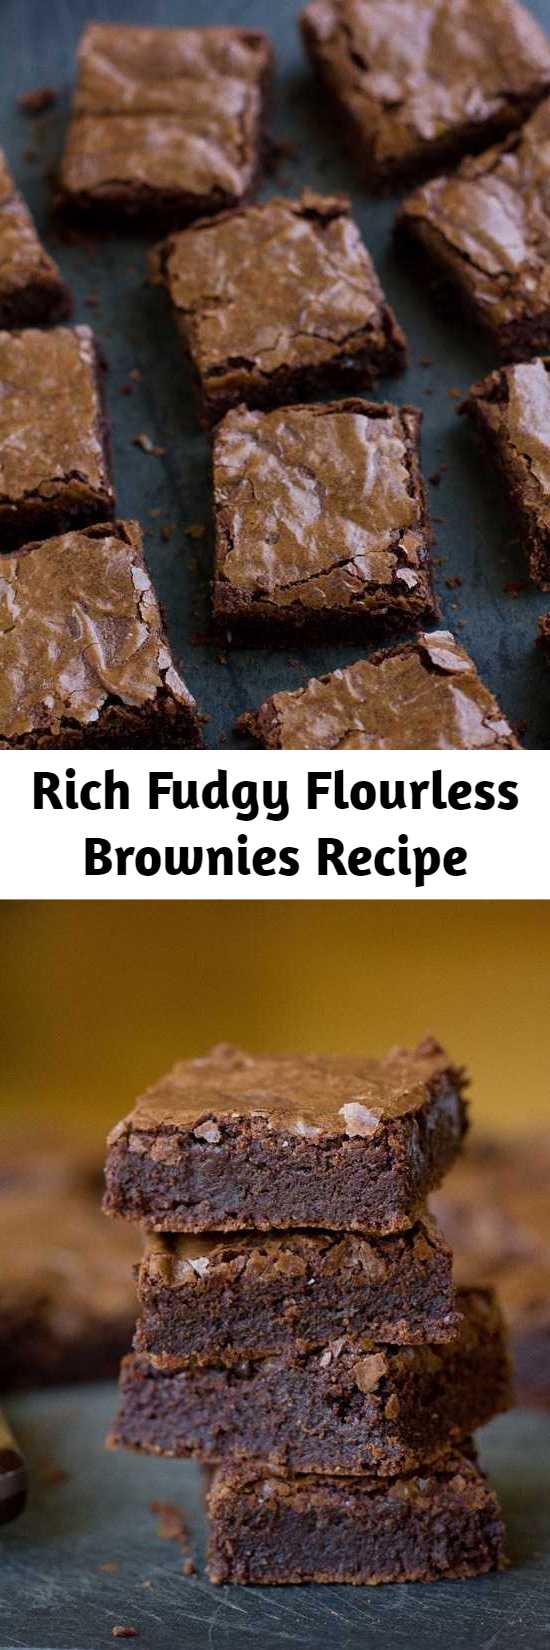 Rich Fudgy Flourless Brownies Recipe - Looking for a gluten free brownie recipe? Look no further! These rich and fudgy flourless brownies are perfectly chewy, dense and intense! No strange ingredients required